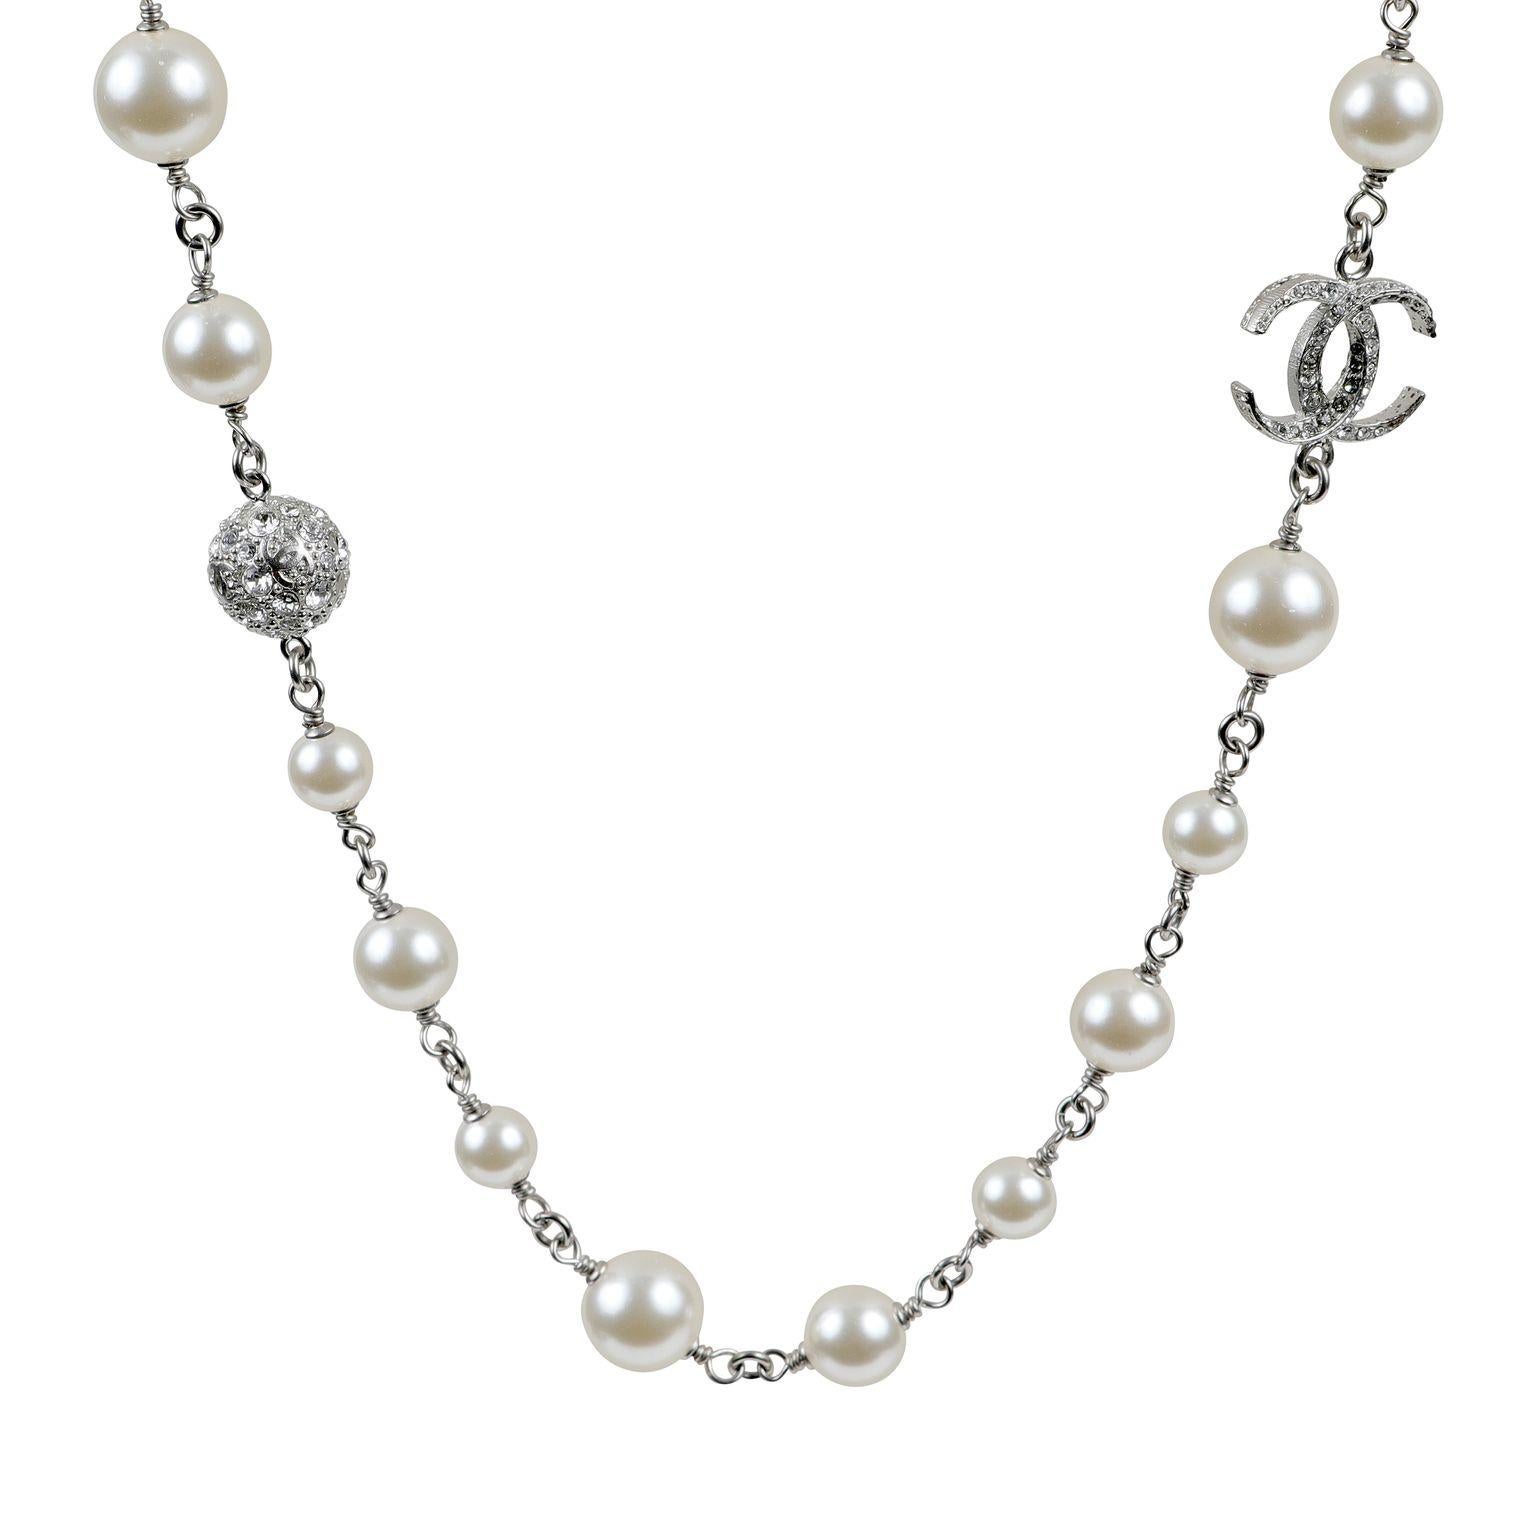 This authentic. Chanel Pearl and Crystal CC Necklace is pristine.  Single strand of white faux pearls with silver.  Crystal interlocking CC and spheres interspersed along the chain.  Pouch or box included. 

ACO 13942
